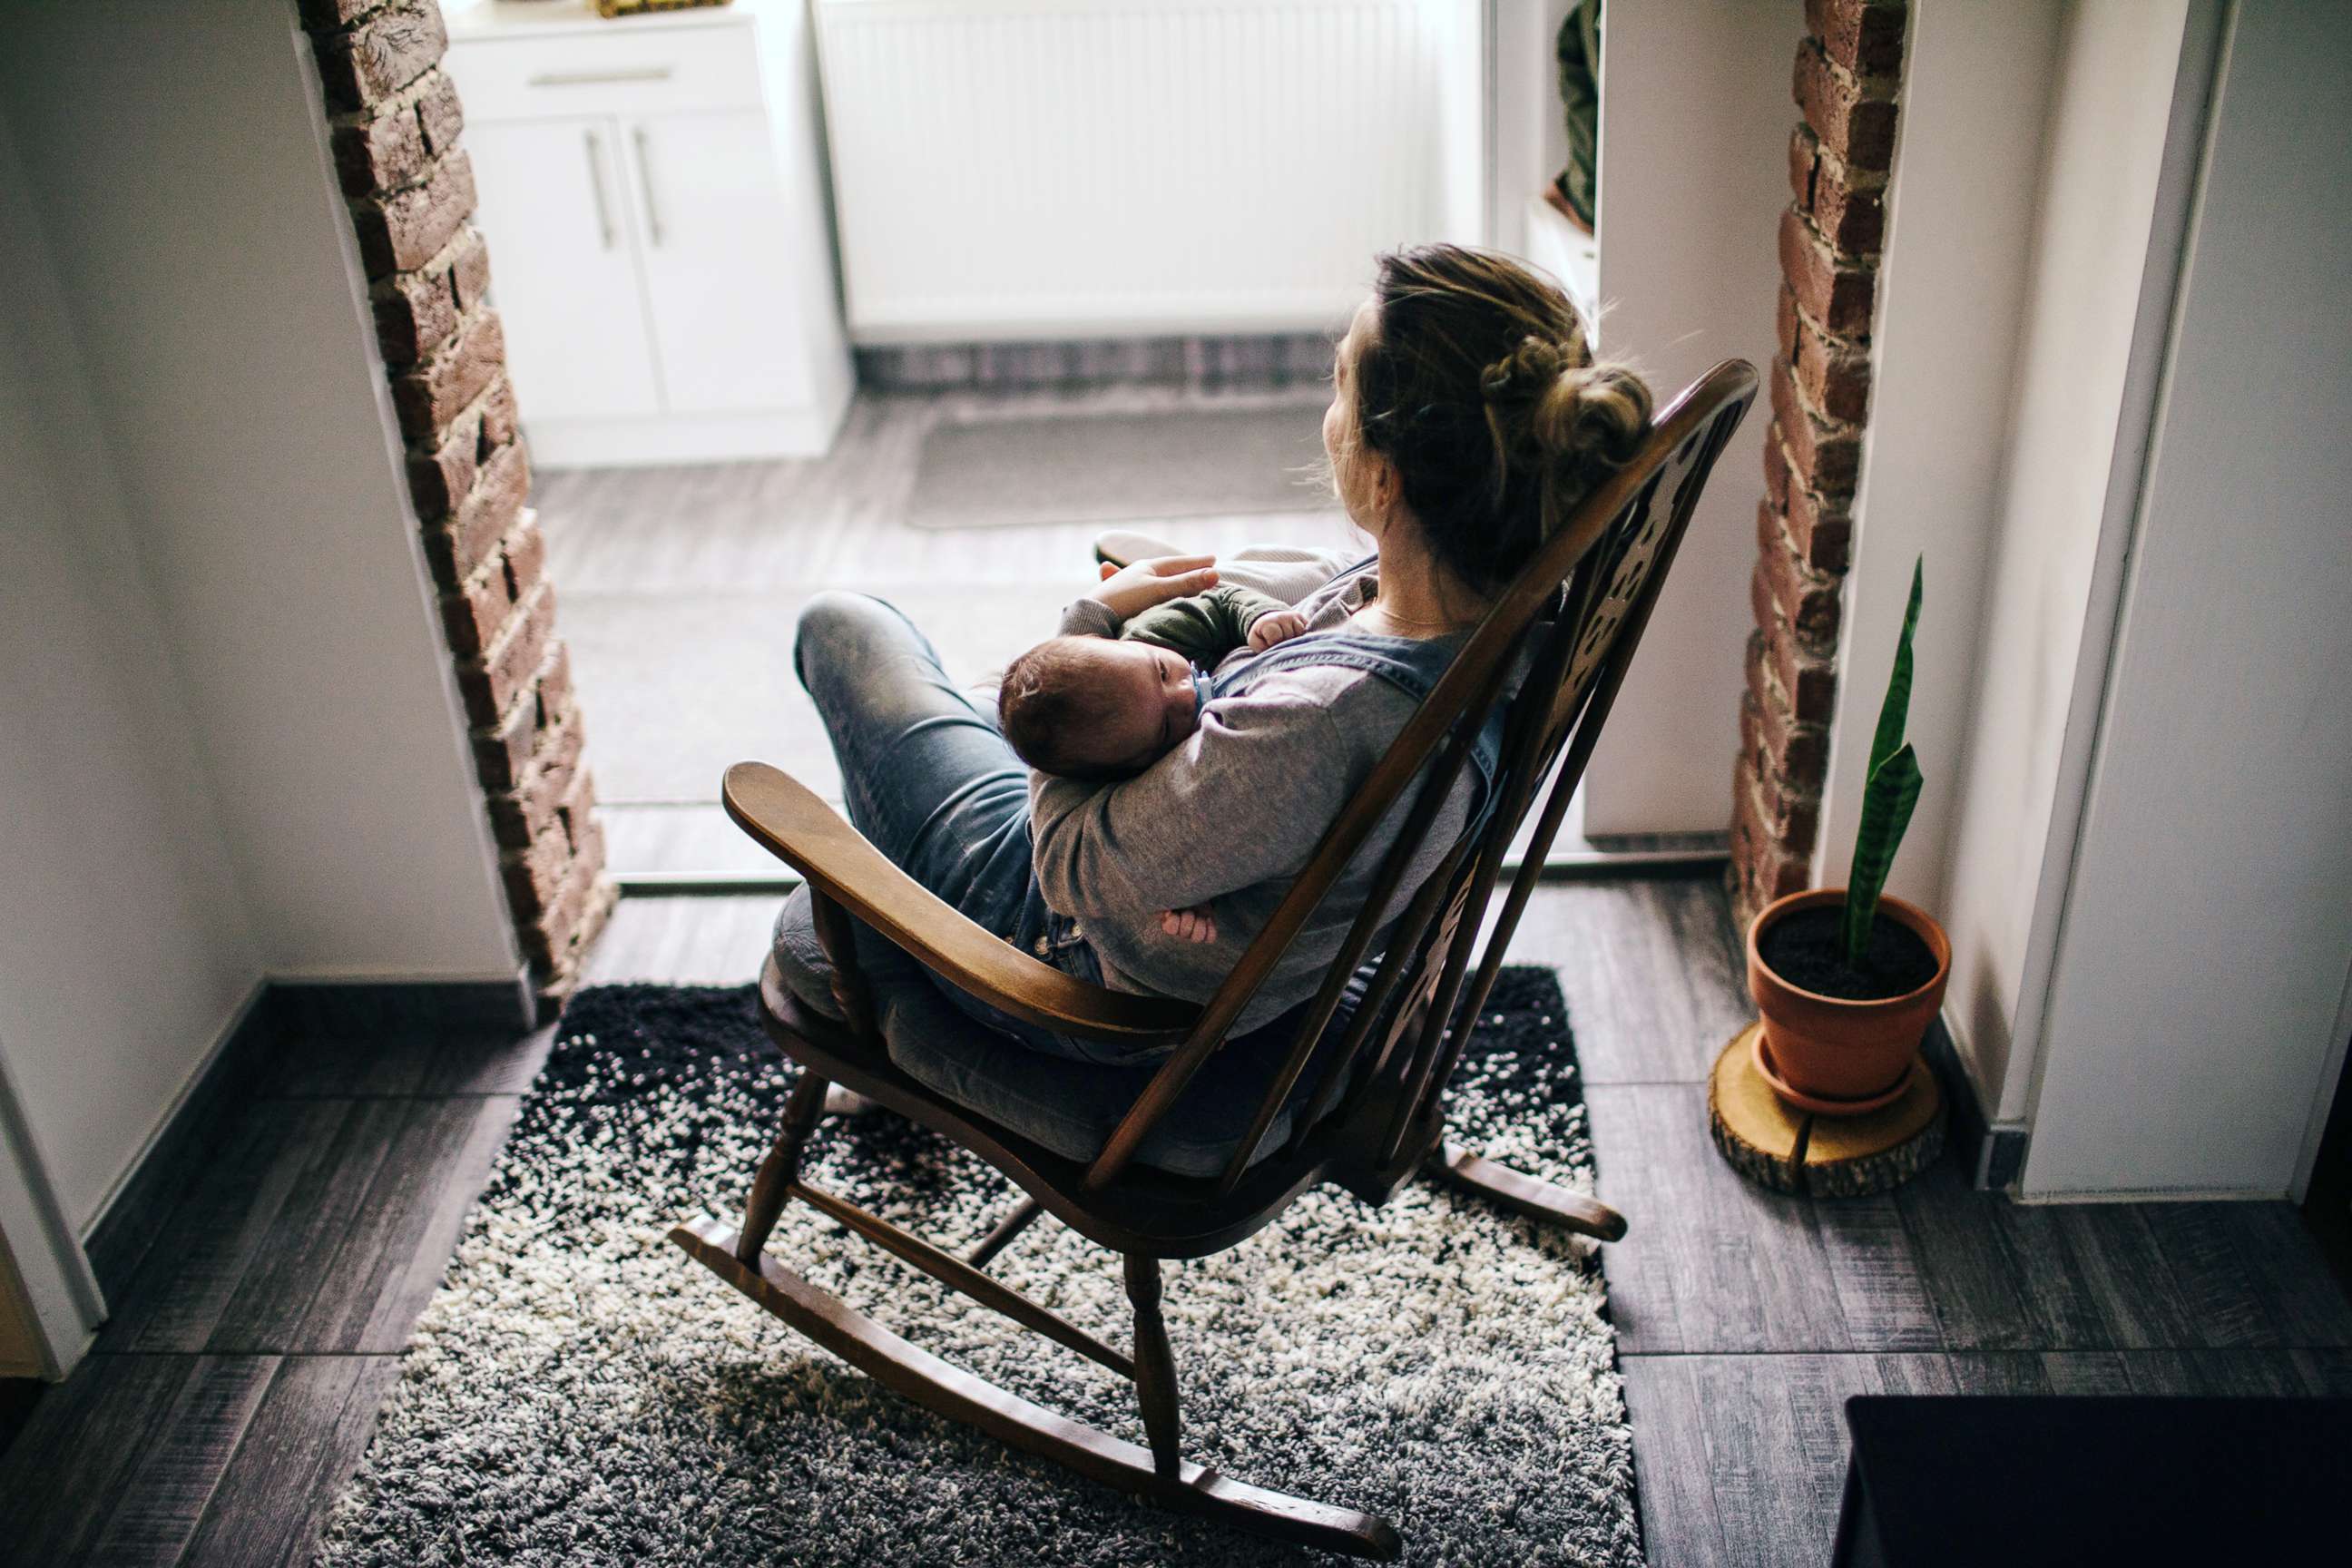 PHOTO: In this undated stock photo, a young mother in a rocking chair rocks her newborn baby to sleep.